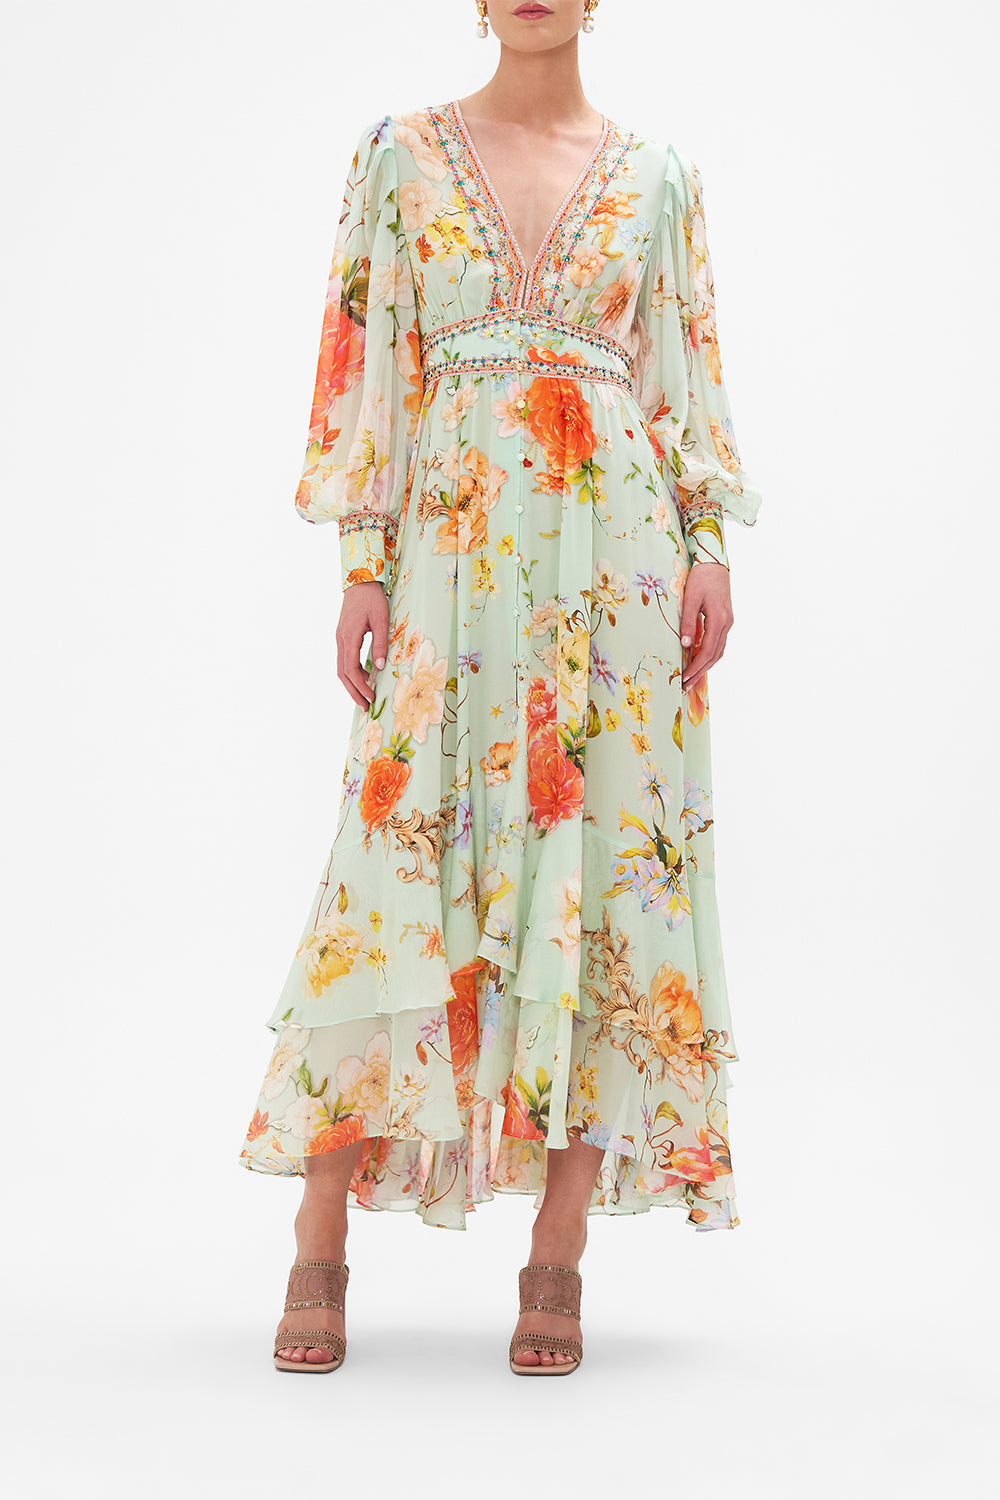 Front view of model wearing CAMILLA silk floral maxi dress in Talk The Walk print